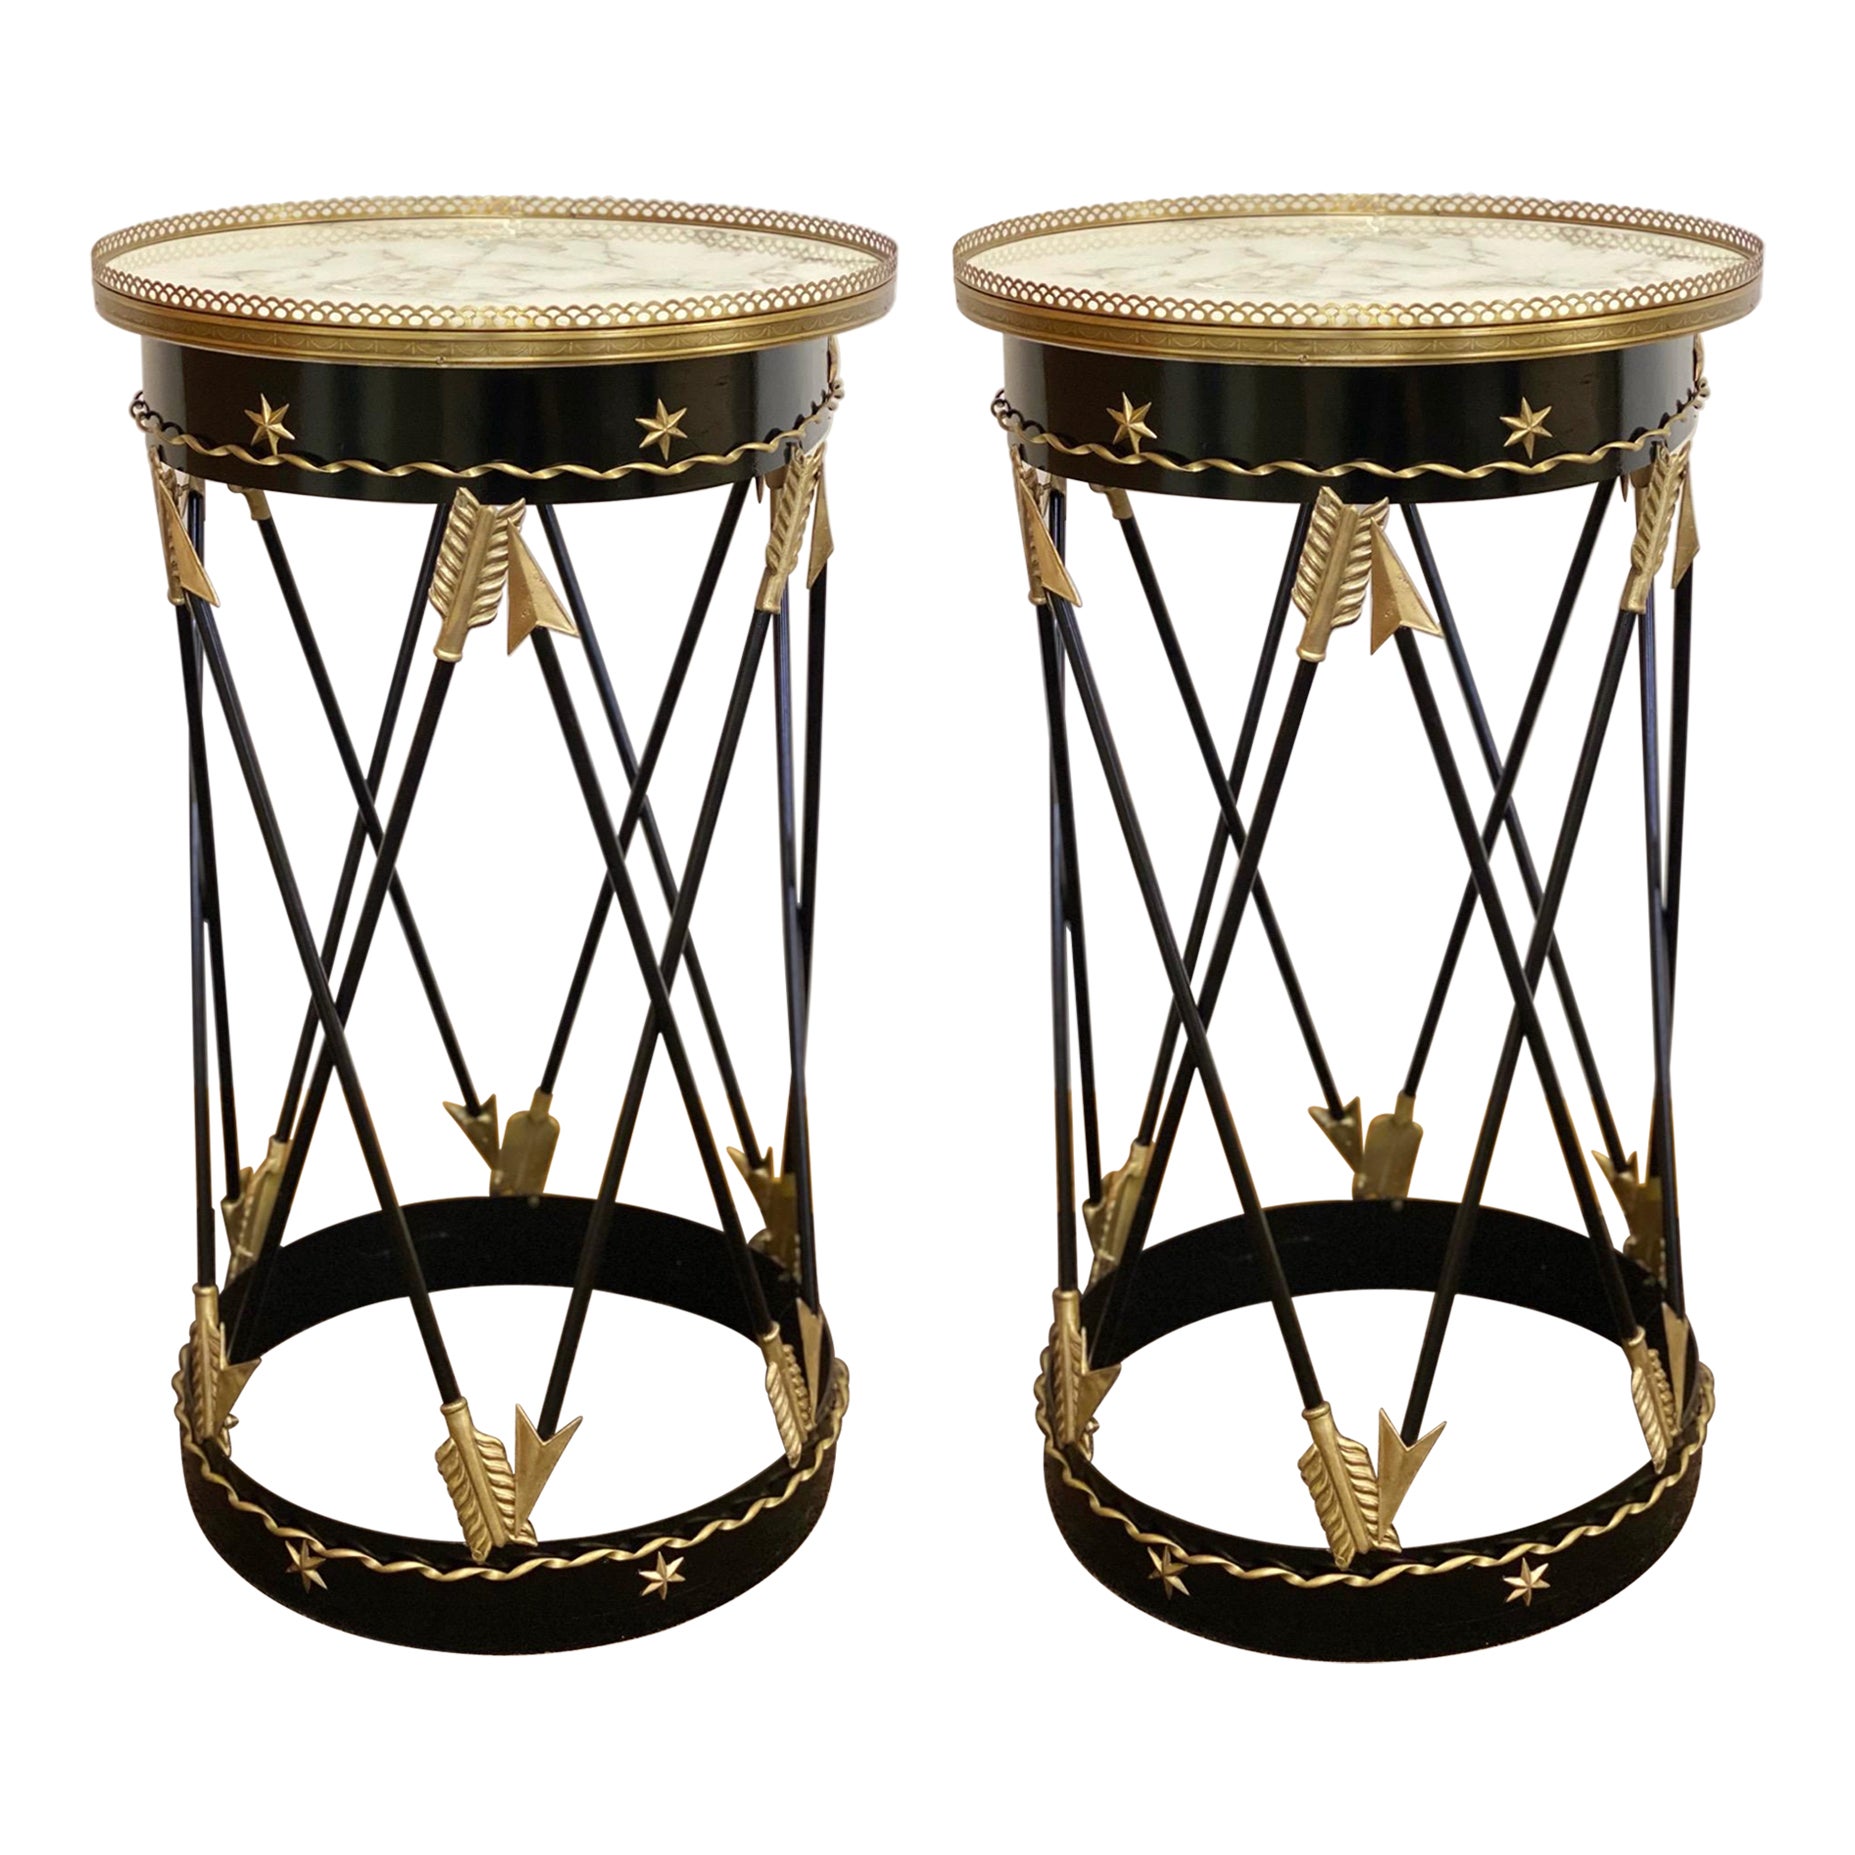 1900s Neoclassical Style Iron Bronze and Marble Arrow Motif Side Tables, a Pair